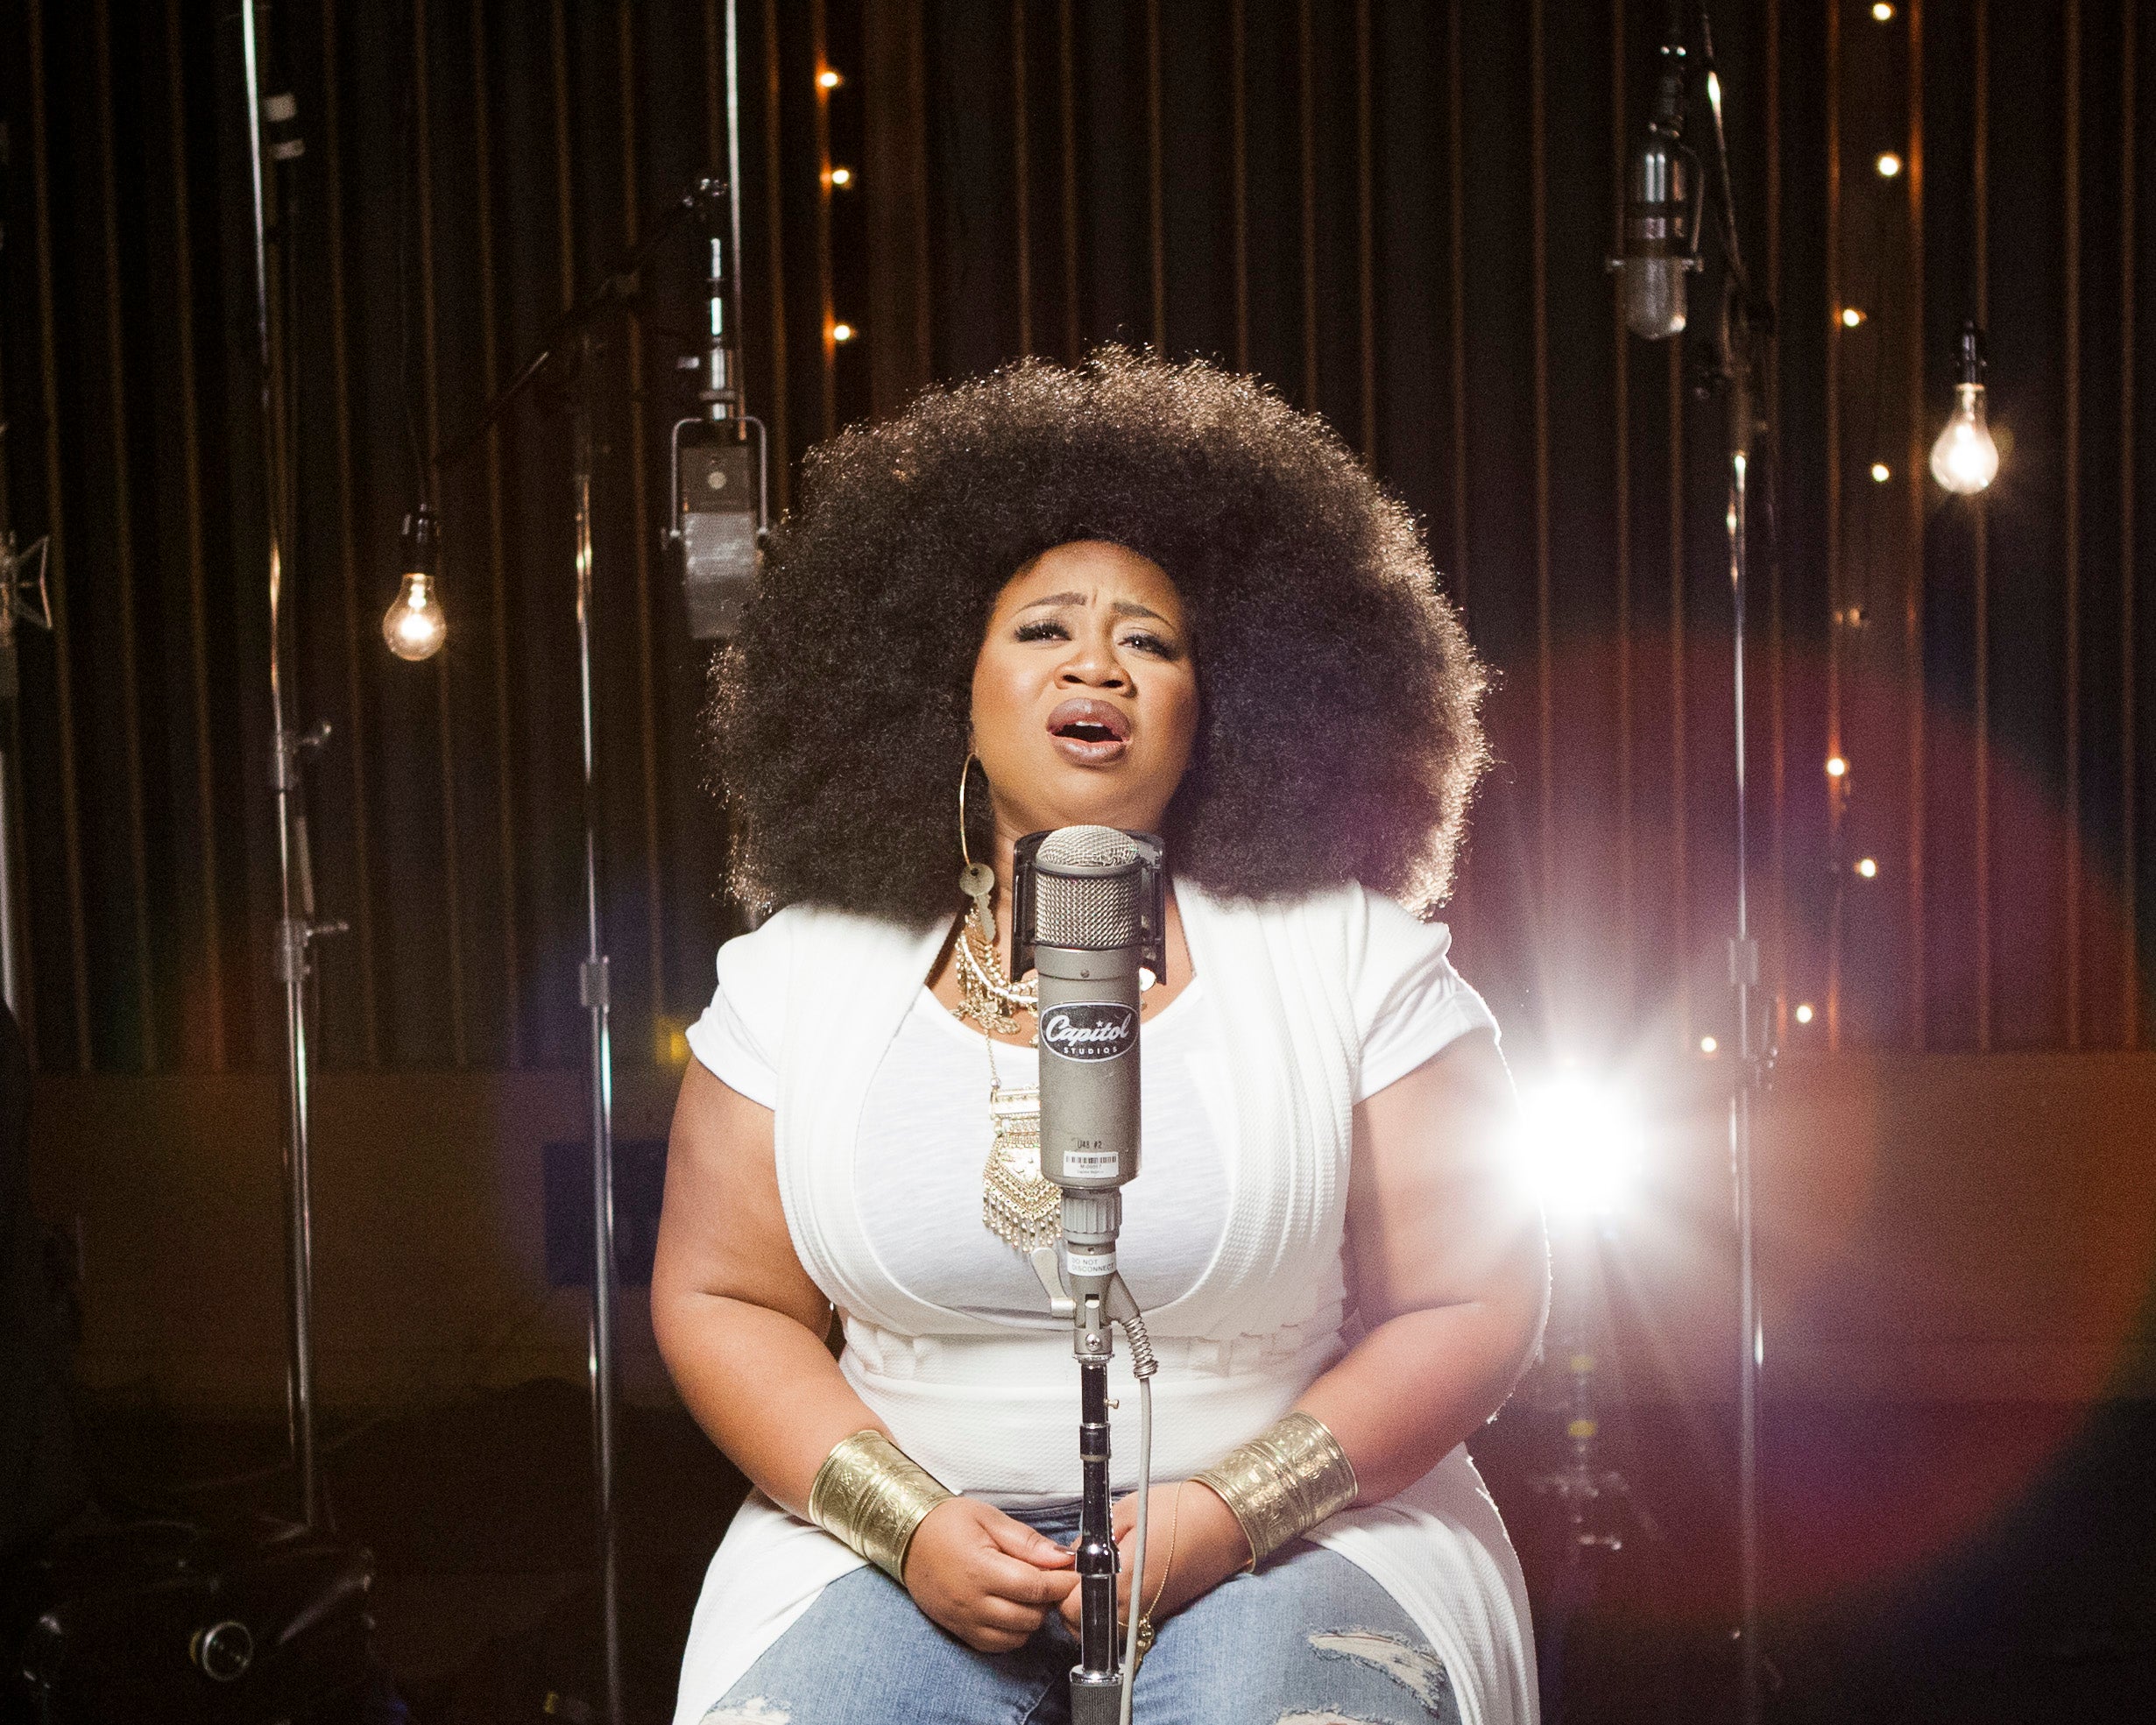 American Idol's La'Porsha Renae Talks New Music And The "Crazy" Thing She Did To Boost Her Confidence
